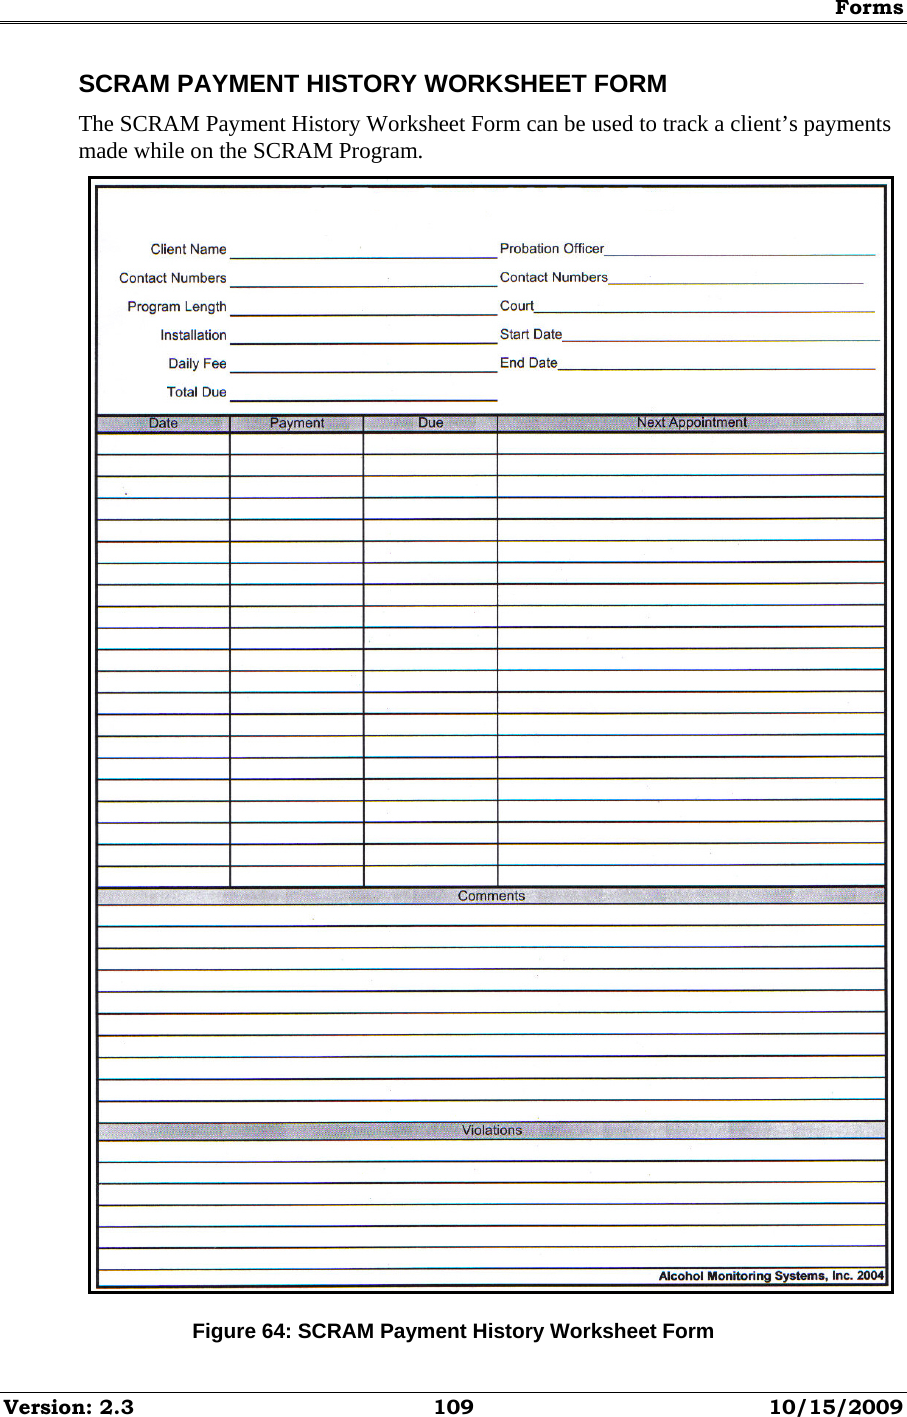 Forms Version: 2.3  109  10/15/2009 SCRAM PAYMENT HISTORY WORKSHEET FORM The SCRAM Payment History Worksheet Form can be used to track a client’s payments made while on the SCRAM Program.  Figure 64: SCRAM Payment History Worksheet Form 